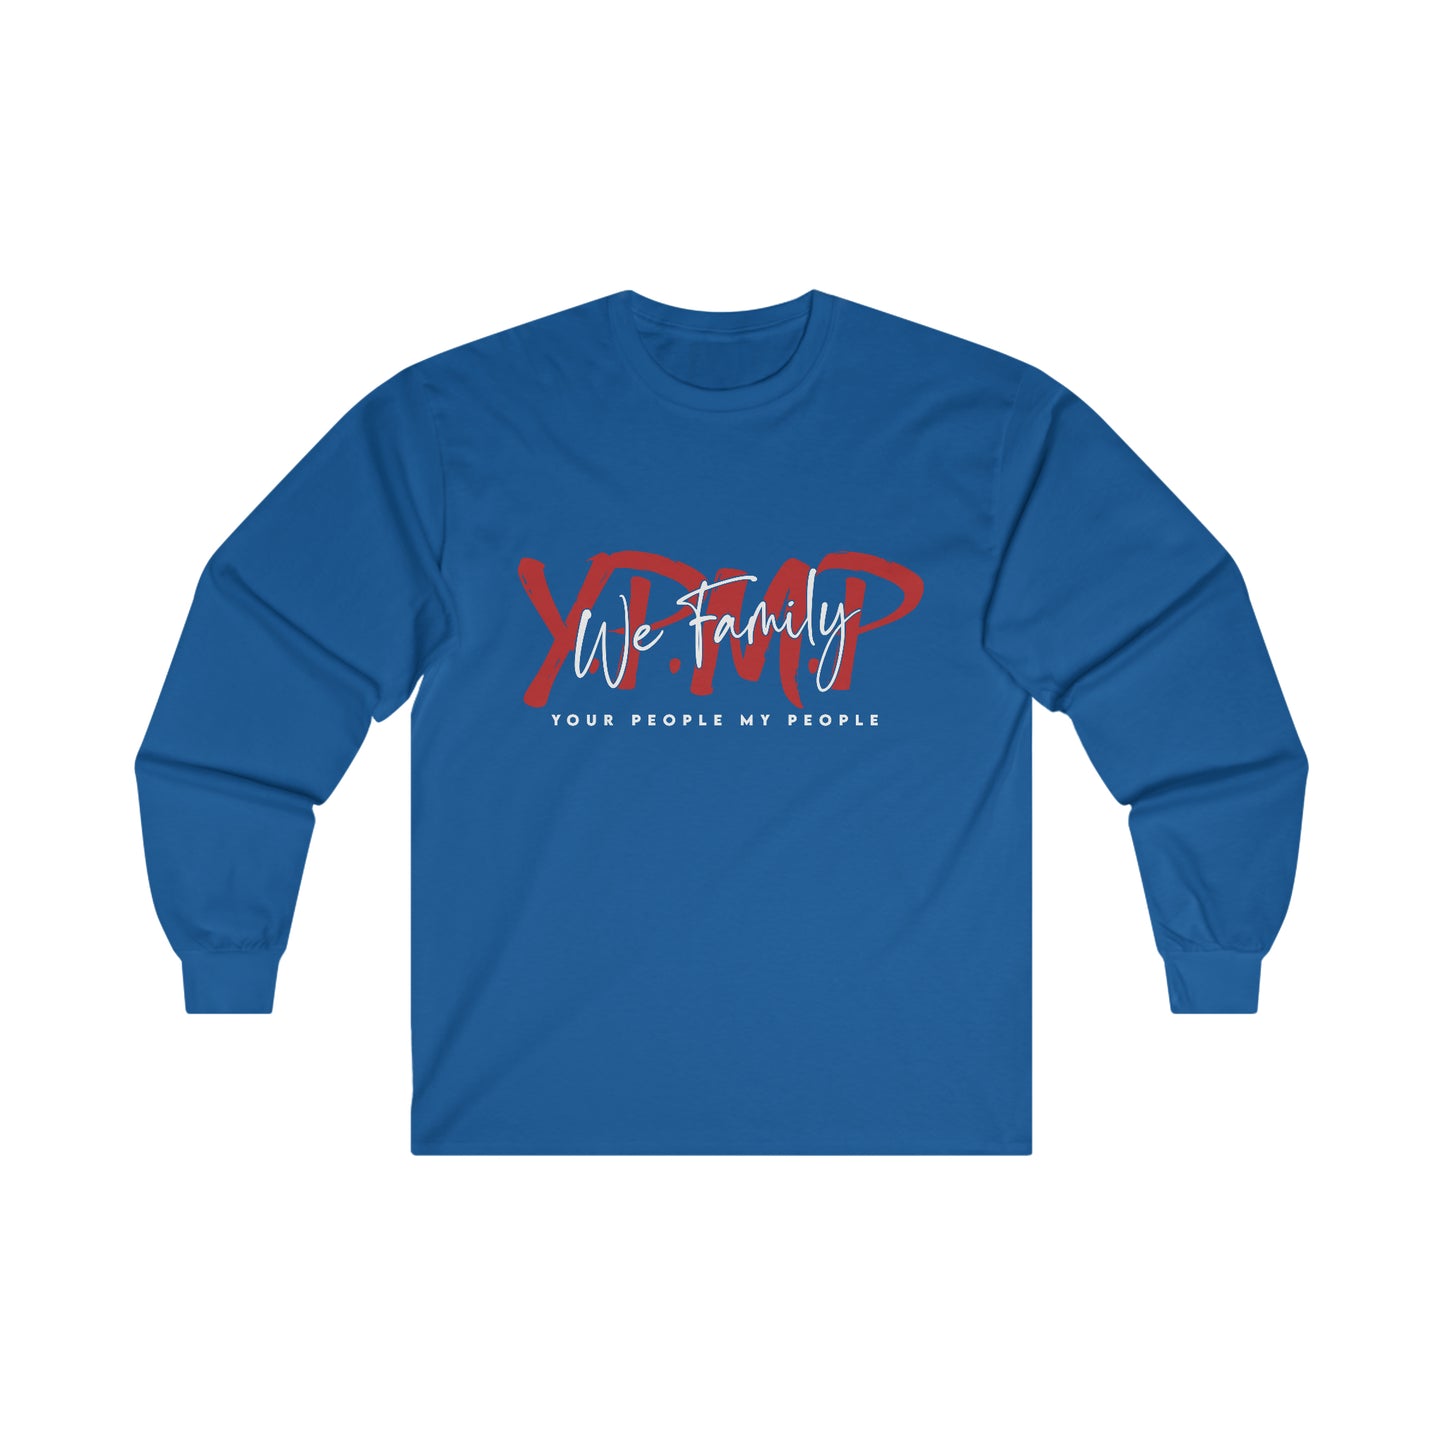 YPMP Initials Red Letters Long Sleeve Tee